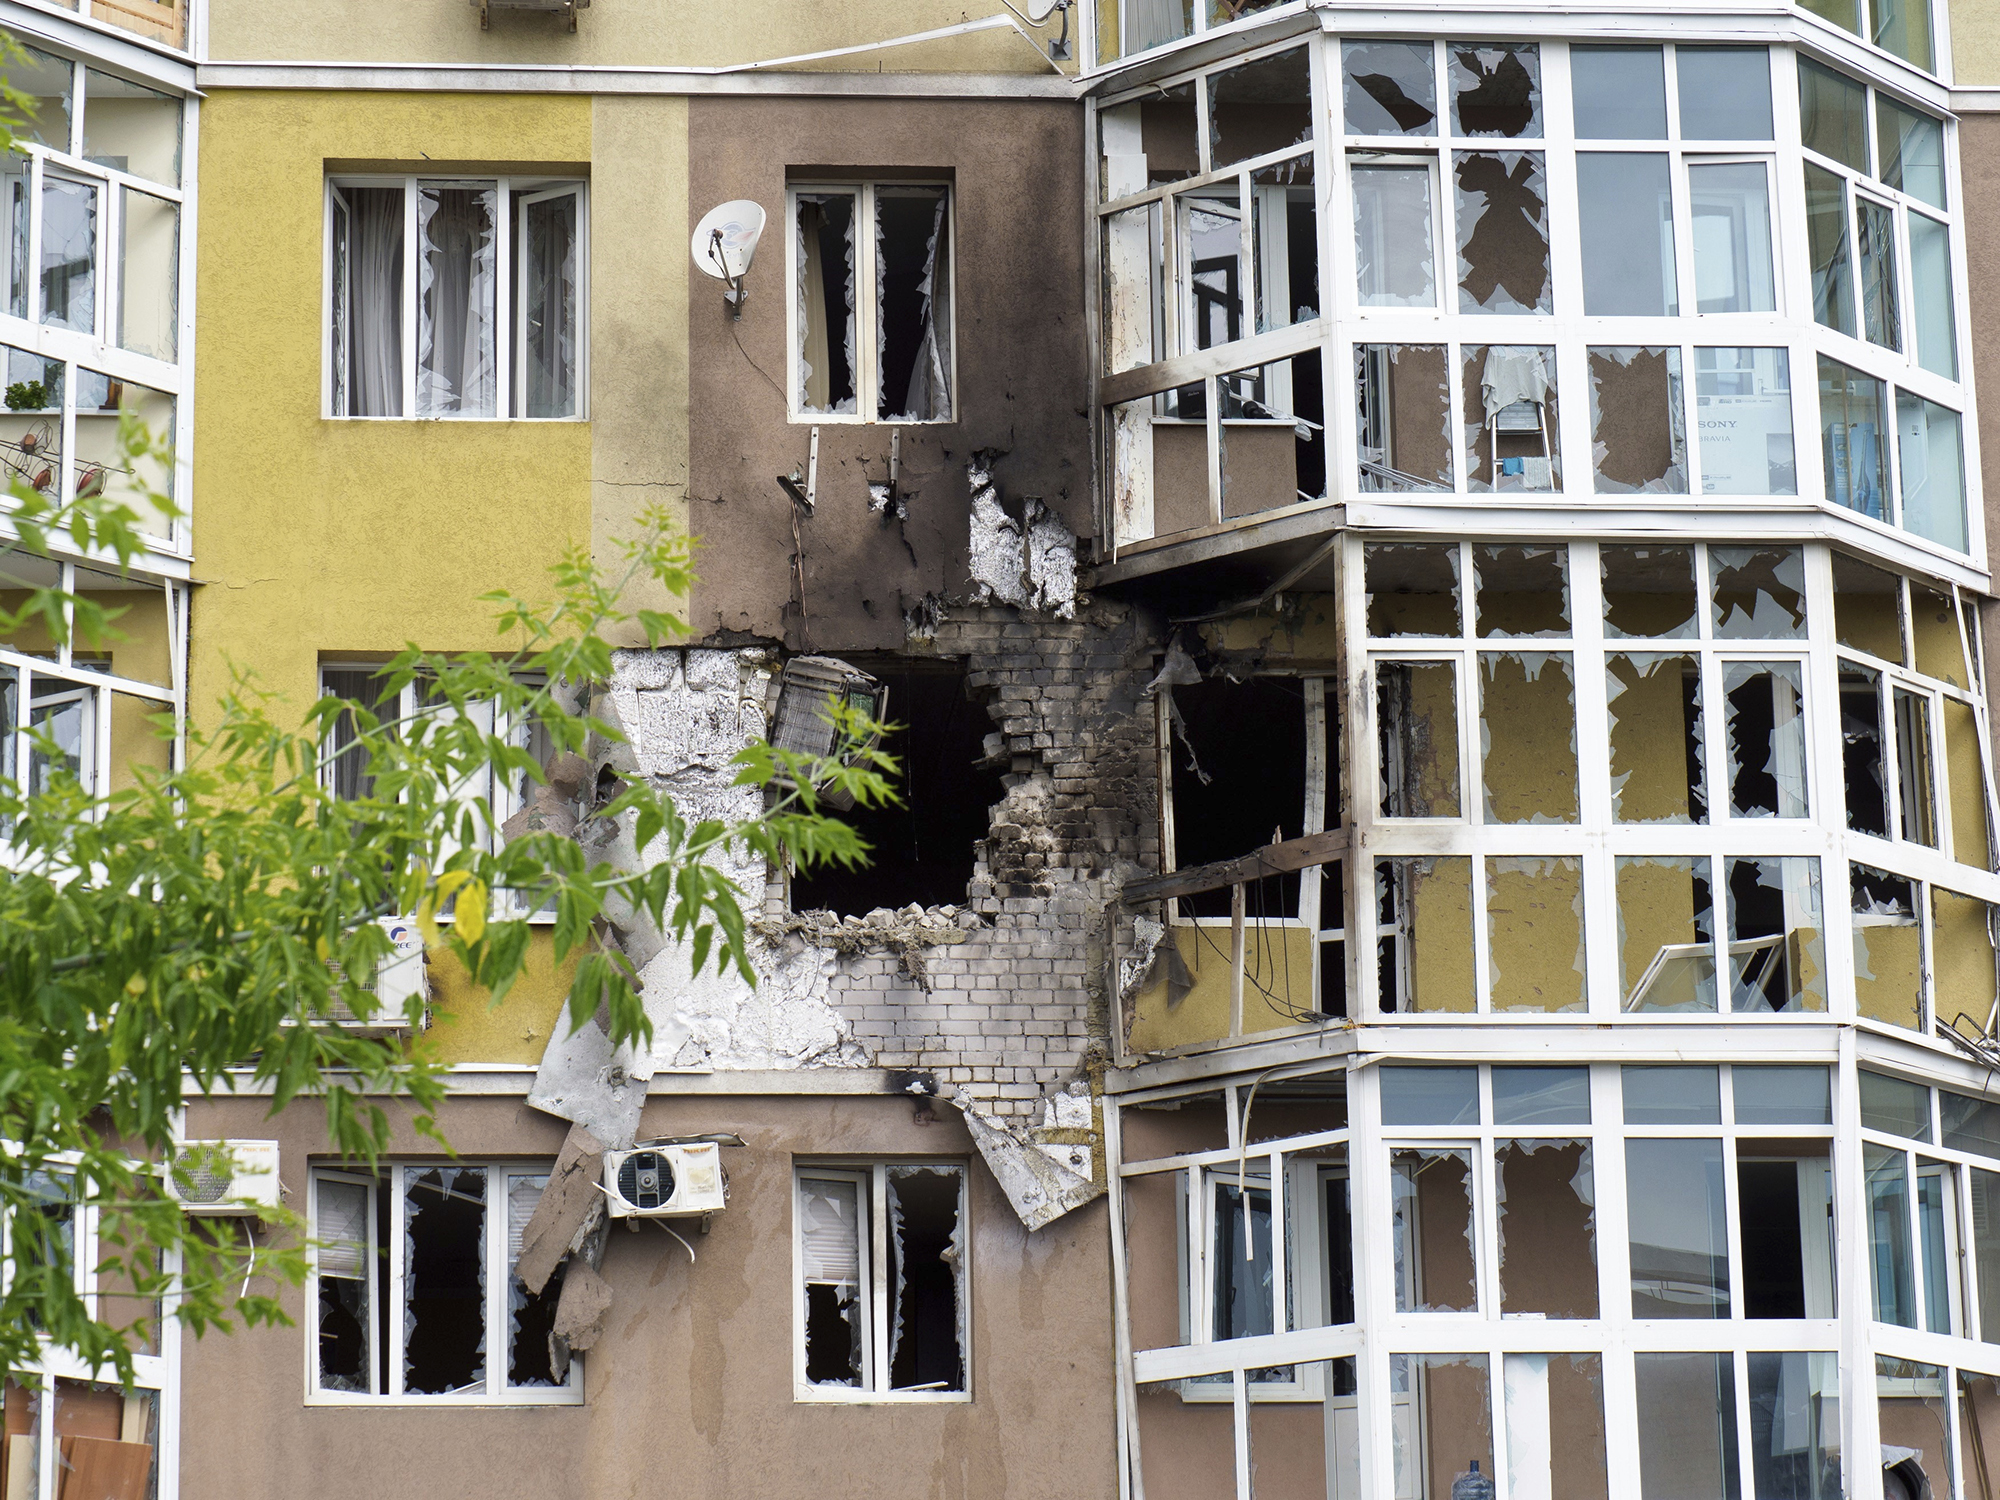 Damage to a building after a drone attack in Voronezh, Russia, on June 9.